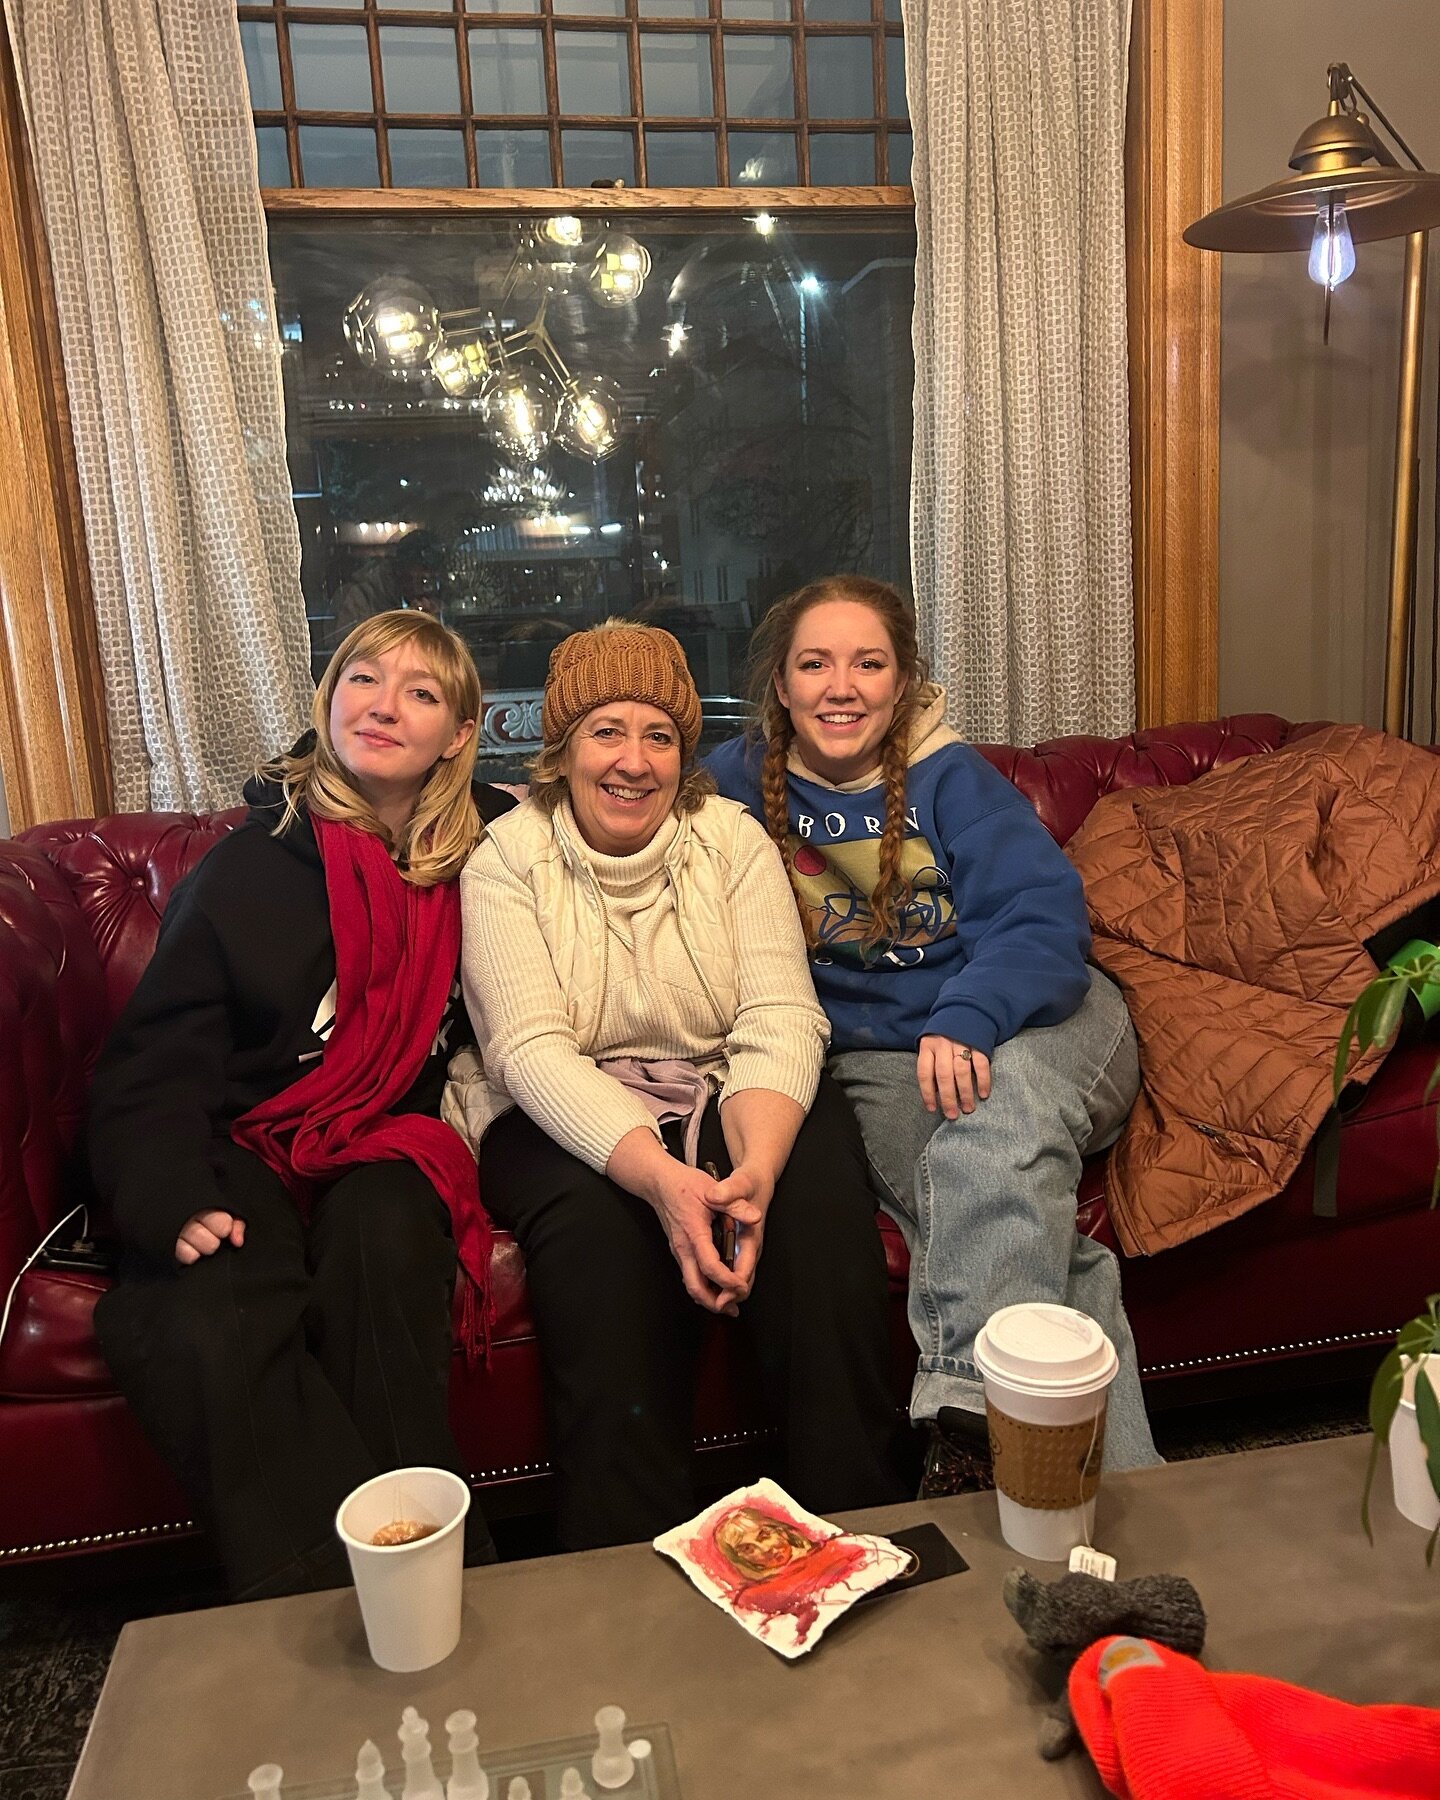 Philadelphia artists @kellymicca and @clarissakearart and Mom @nicmic63 traveled to the hostel for an art show of @sprickdaniel.

Whether with friends, family, or solo, we welcome all travelers to stay at the #1 USA Hostel. Book direct on our website